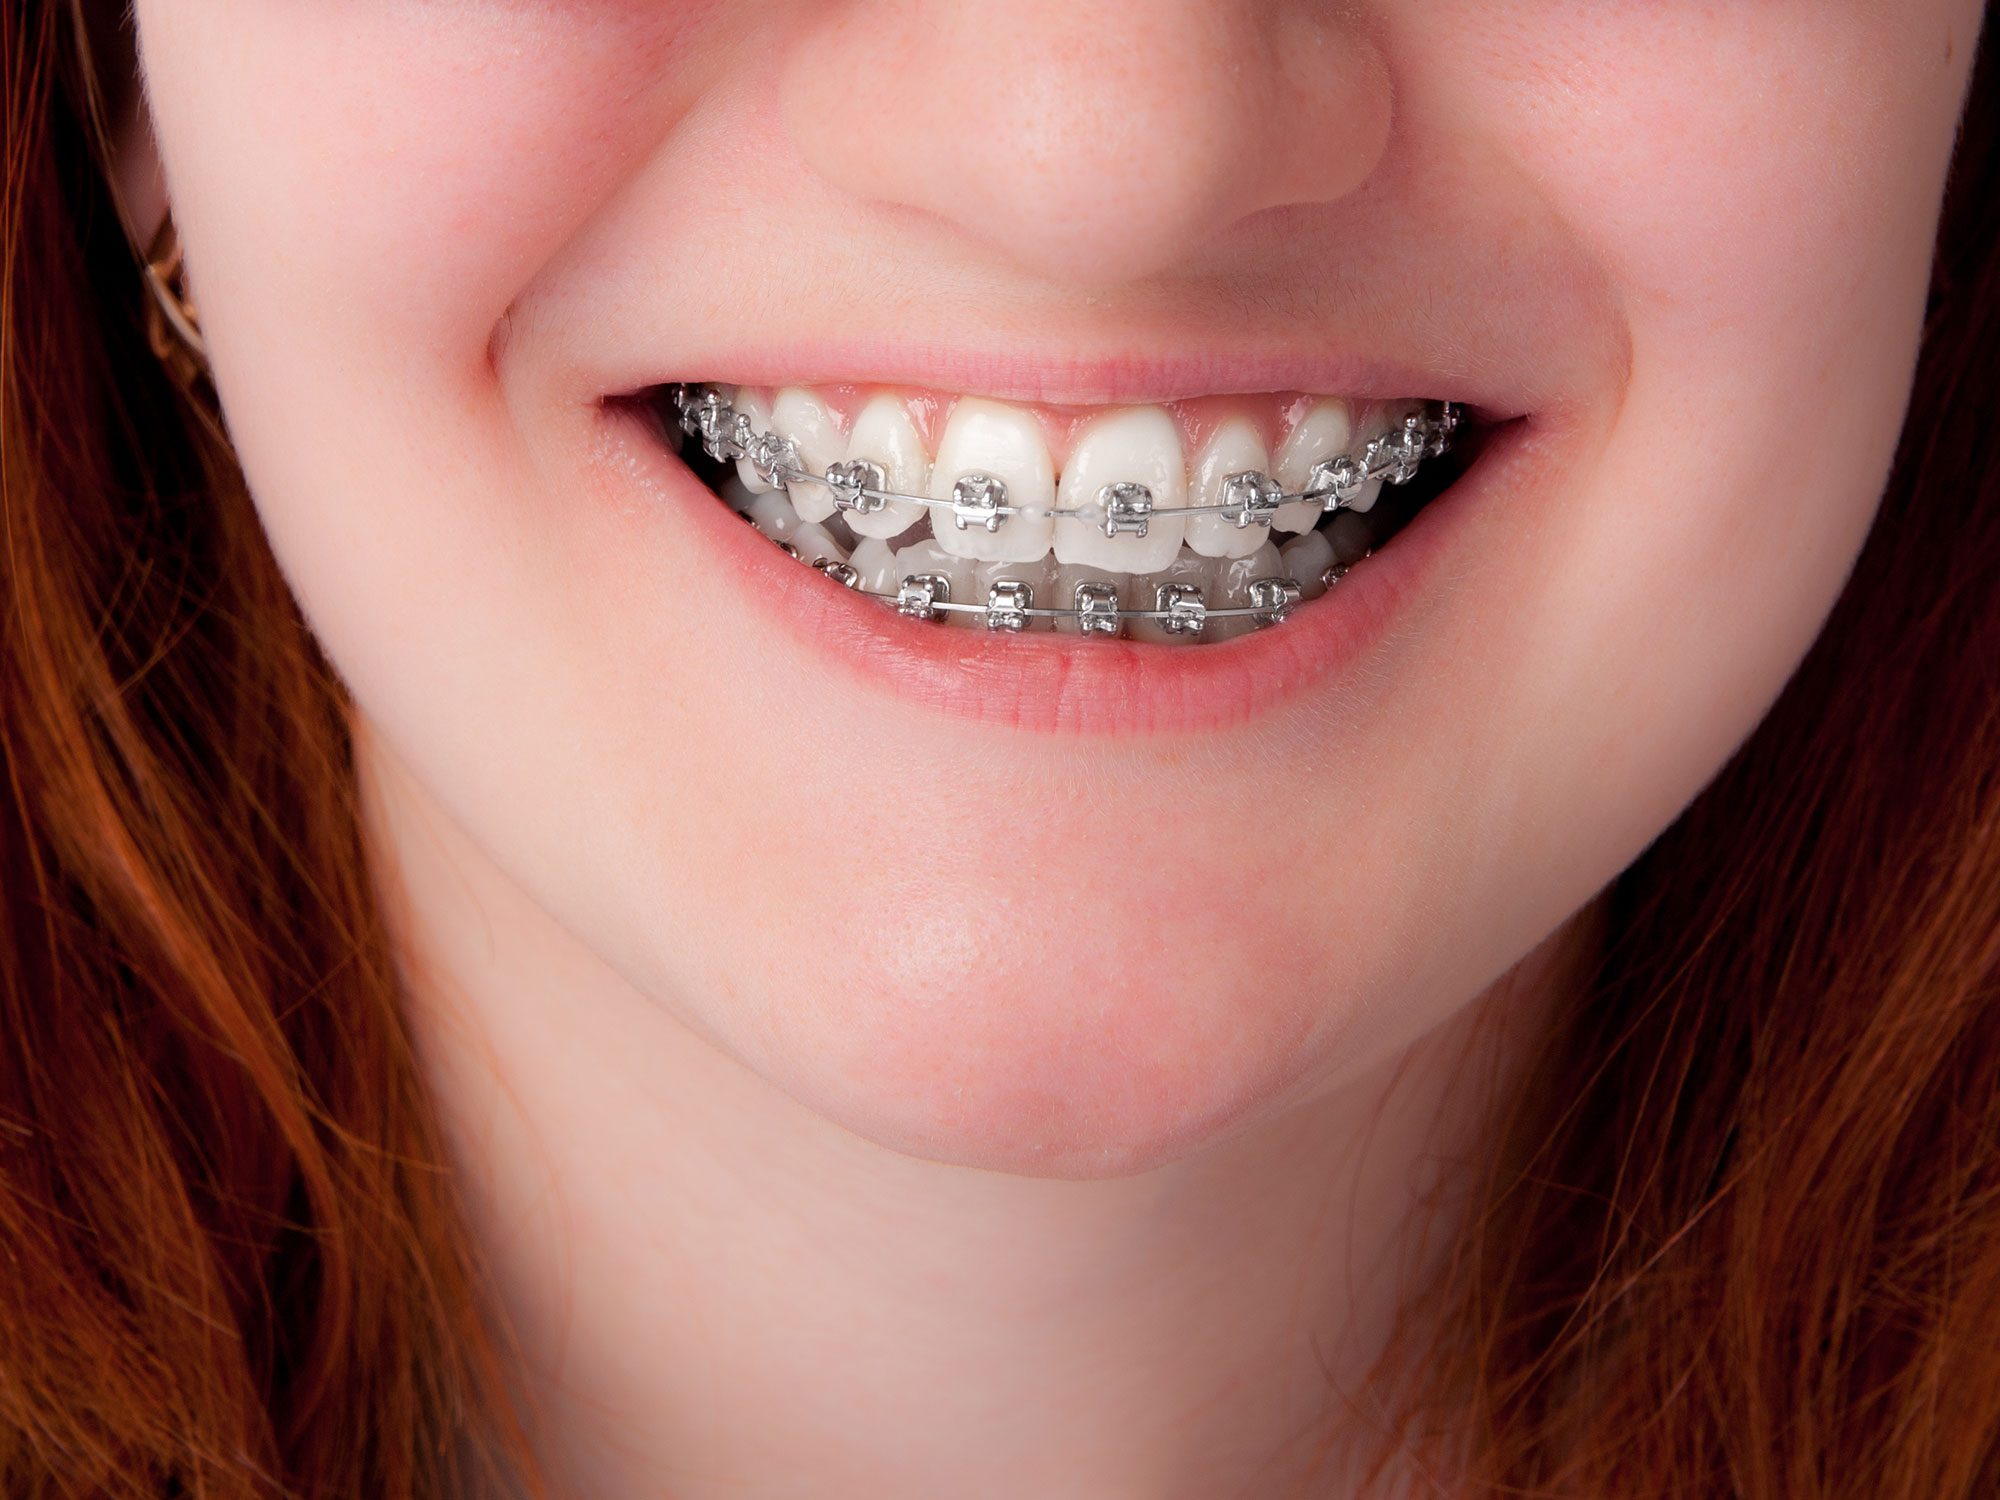 Braces For Young Kids Might Not Always Be Best : NPR